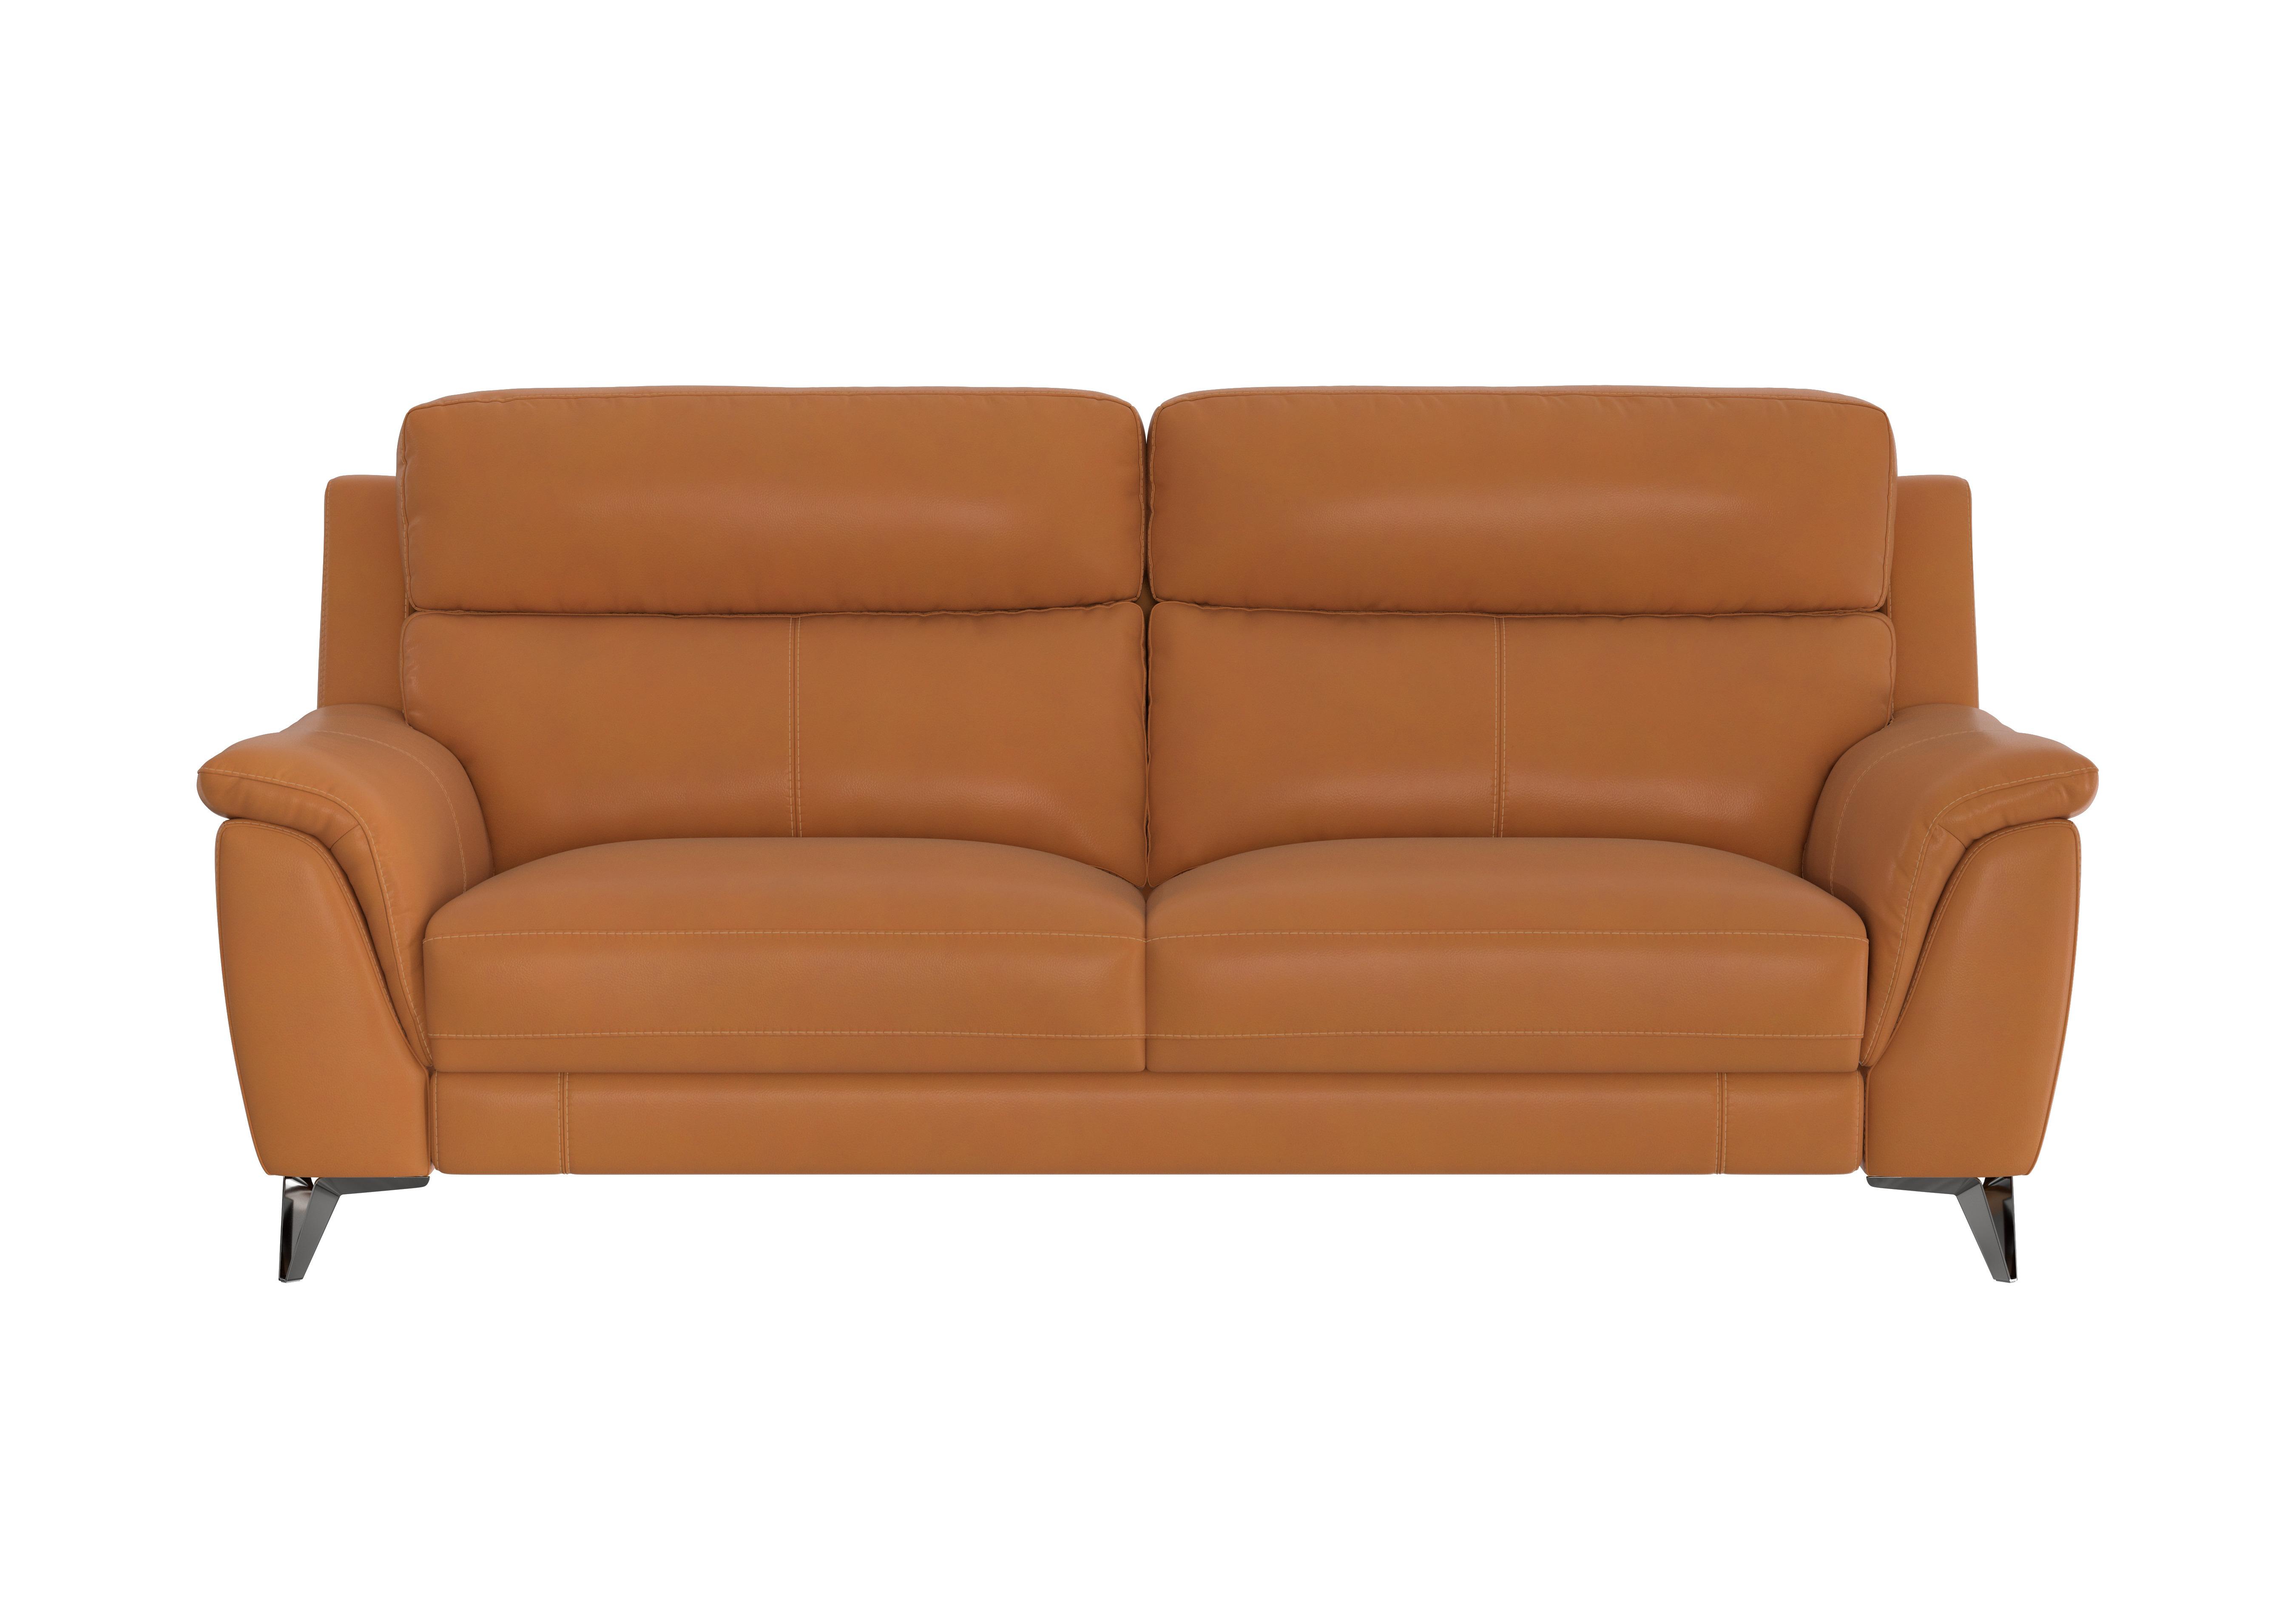 Contempo 3 Seater Leather Sofa in Bv-335e Honey Yellow on Furniture Village